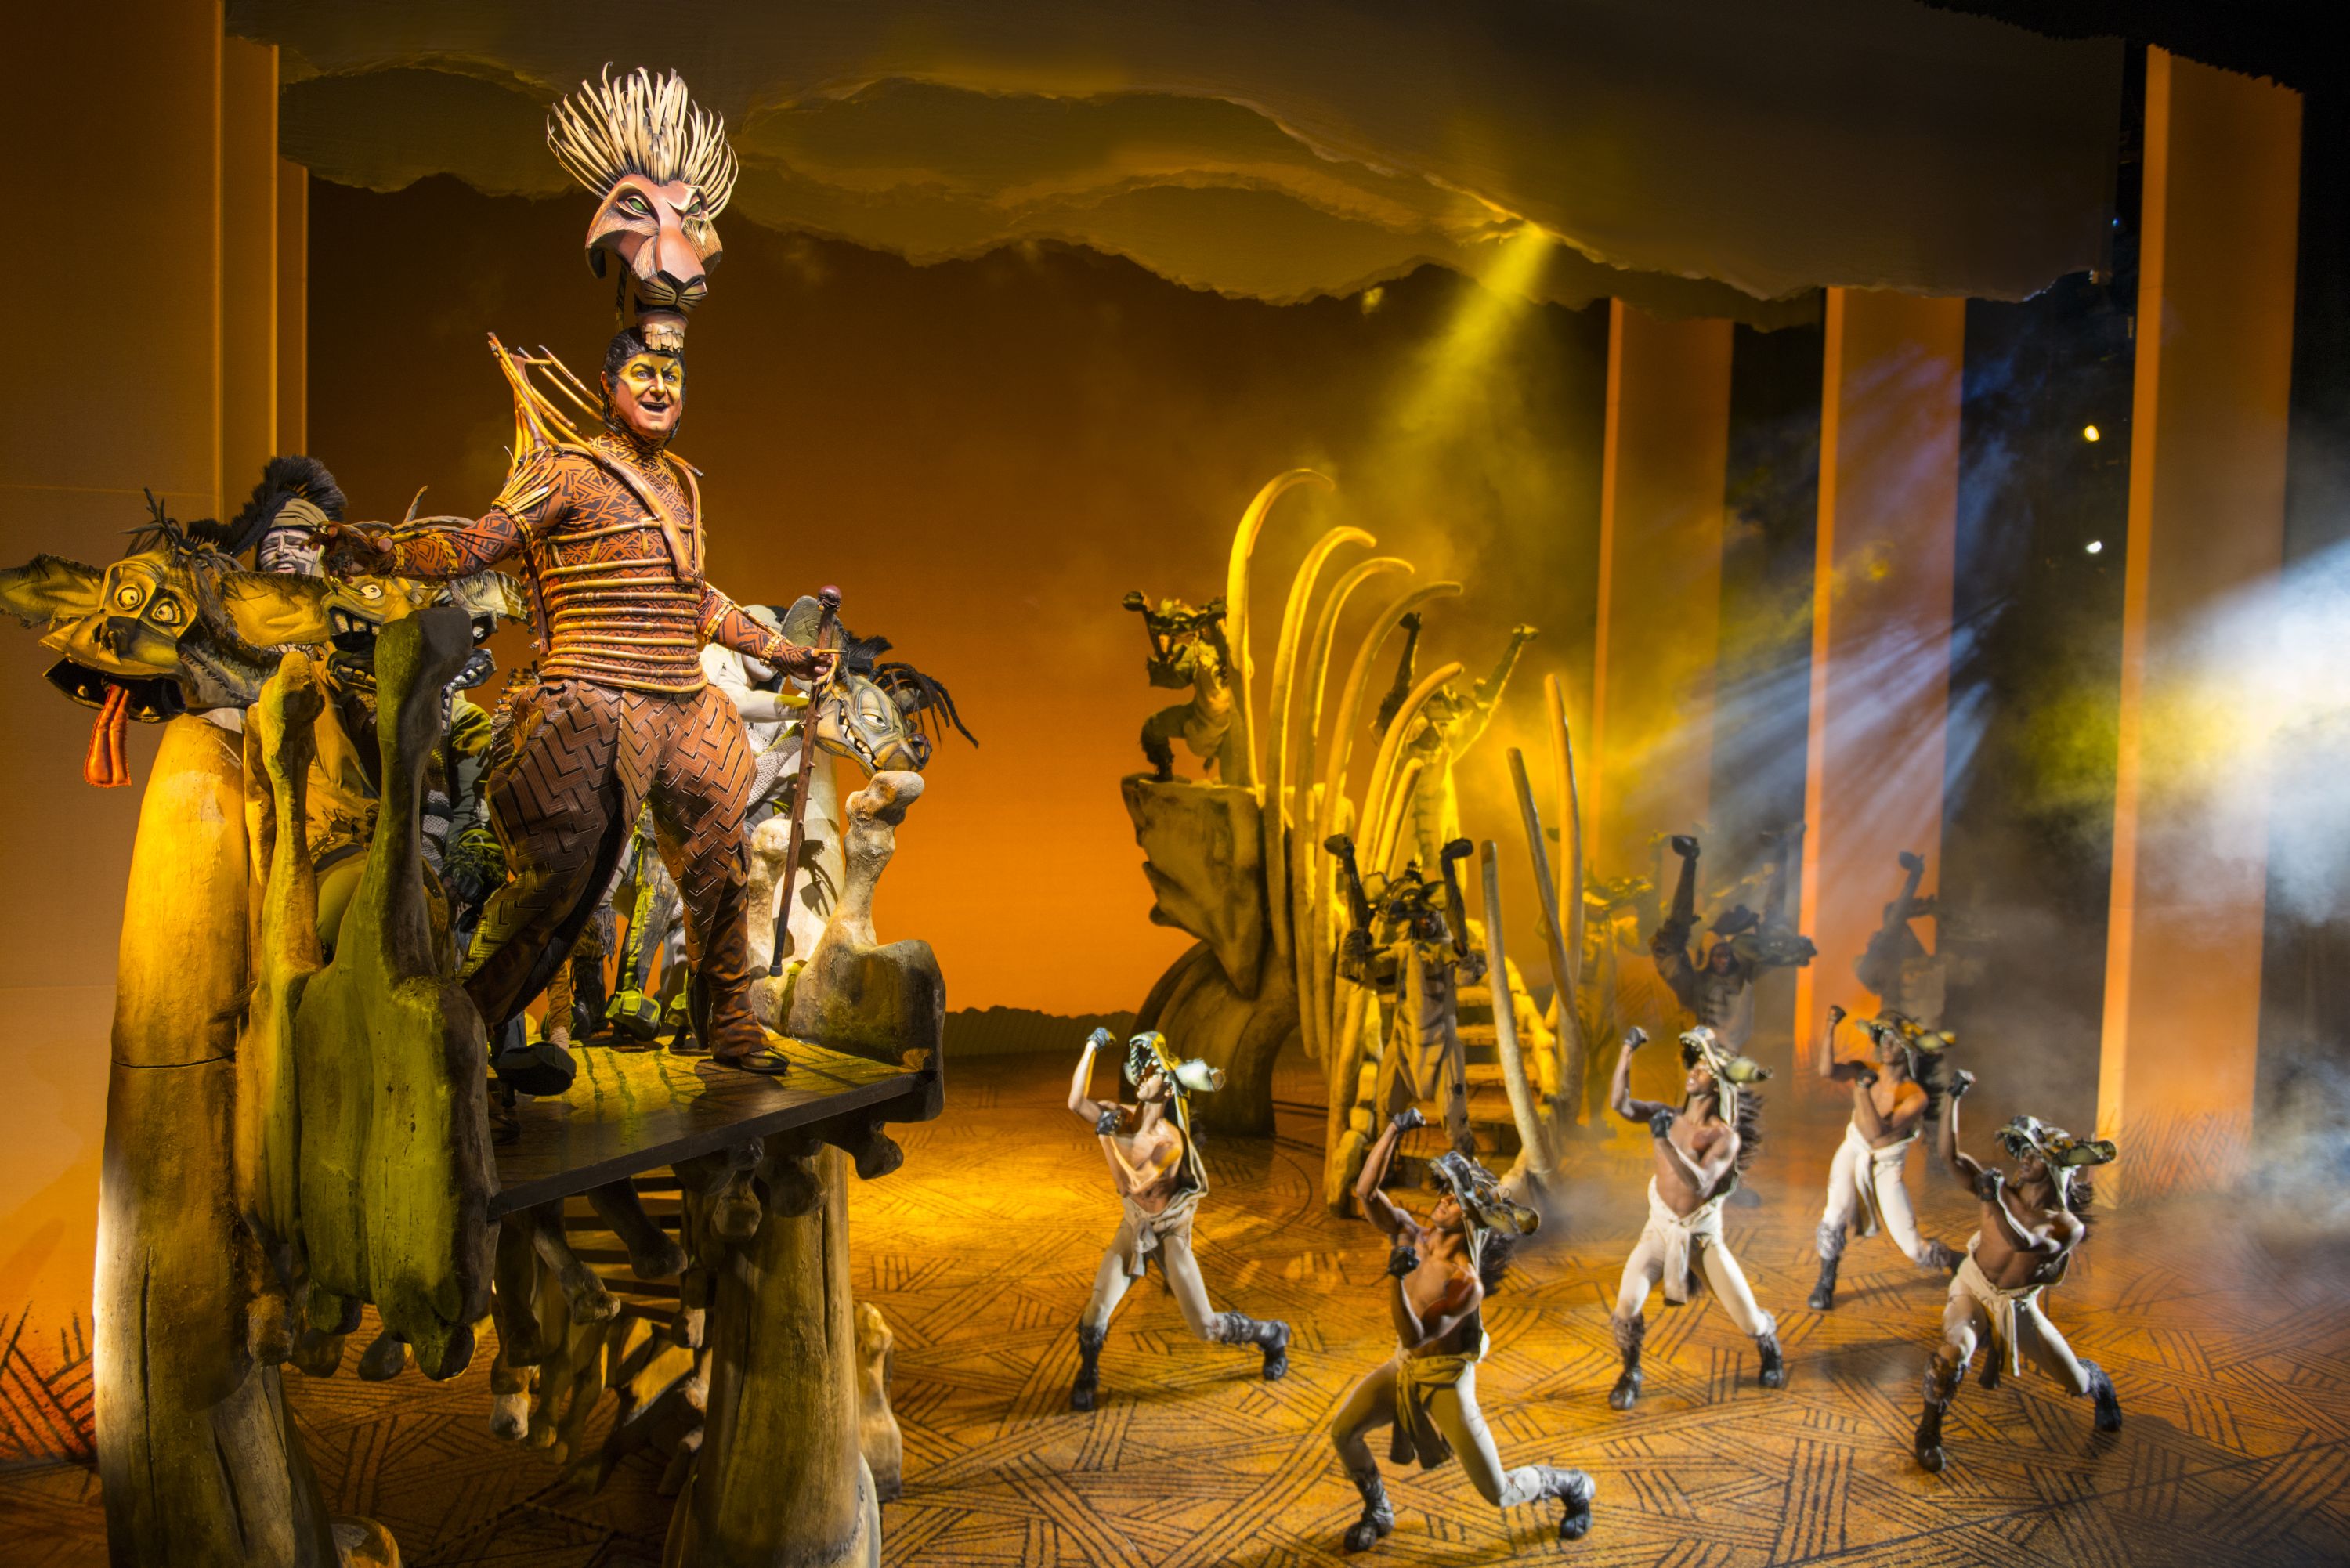 Spencer Plachy as Scar in Disney's The Lion King